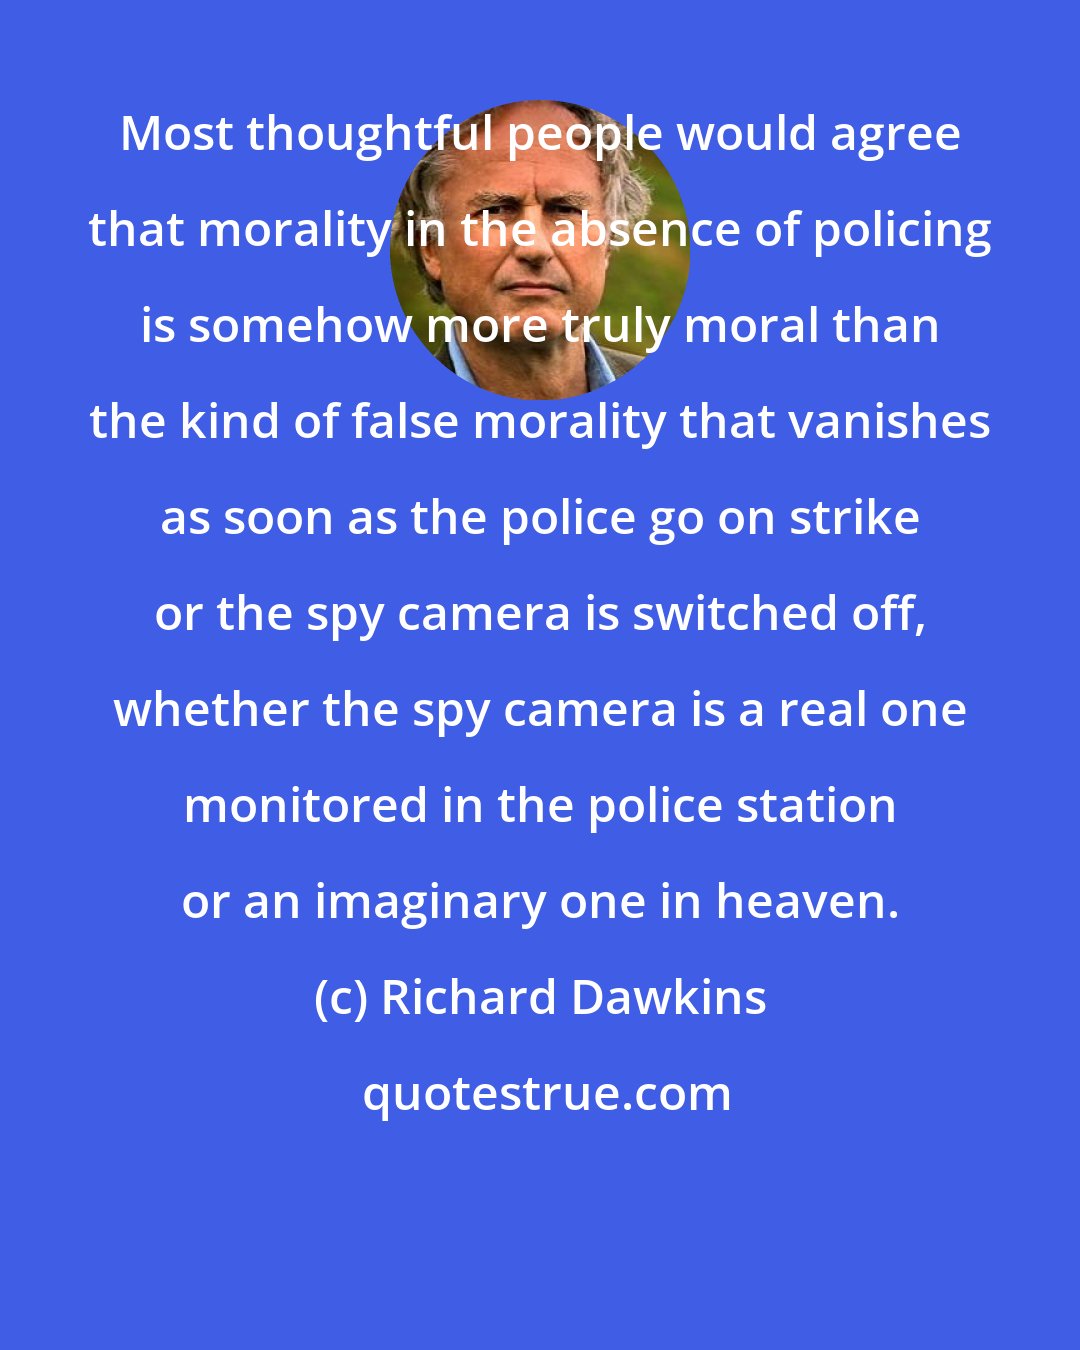 Richard Dawkins: Most thoughtful people would agree that morality in the absence of policing is somehow more truly moral than the kind of false morality that vanishes as soon as the police go on strike or the spy camera is switched off, whether the spy camera is a real one monitored in the police station or an imaginary one in heaven.